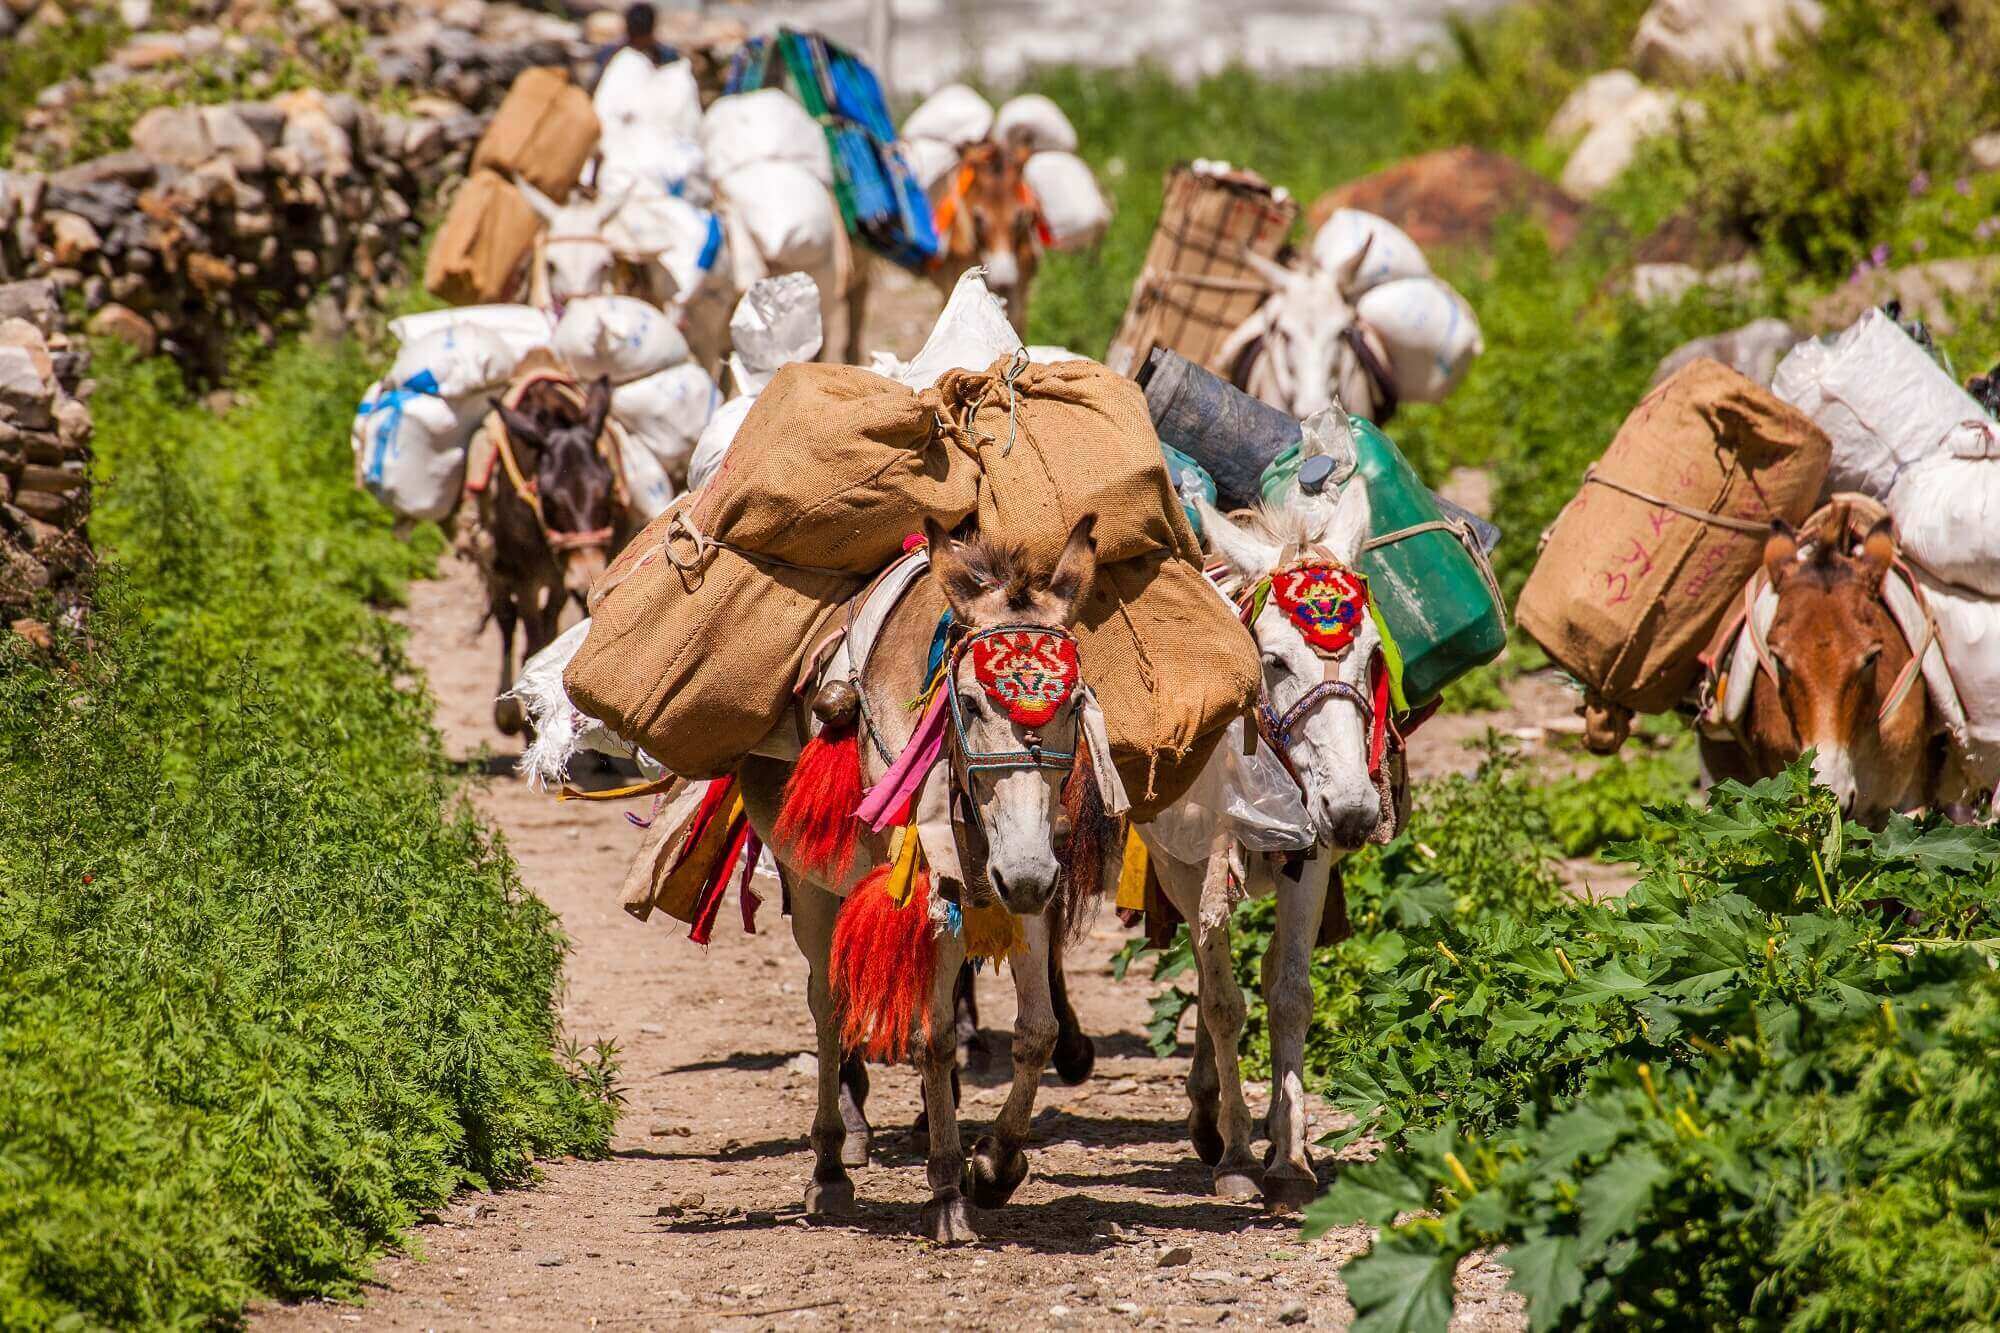 Image of Mules Carrying Loads